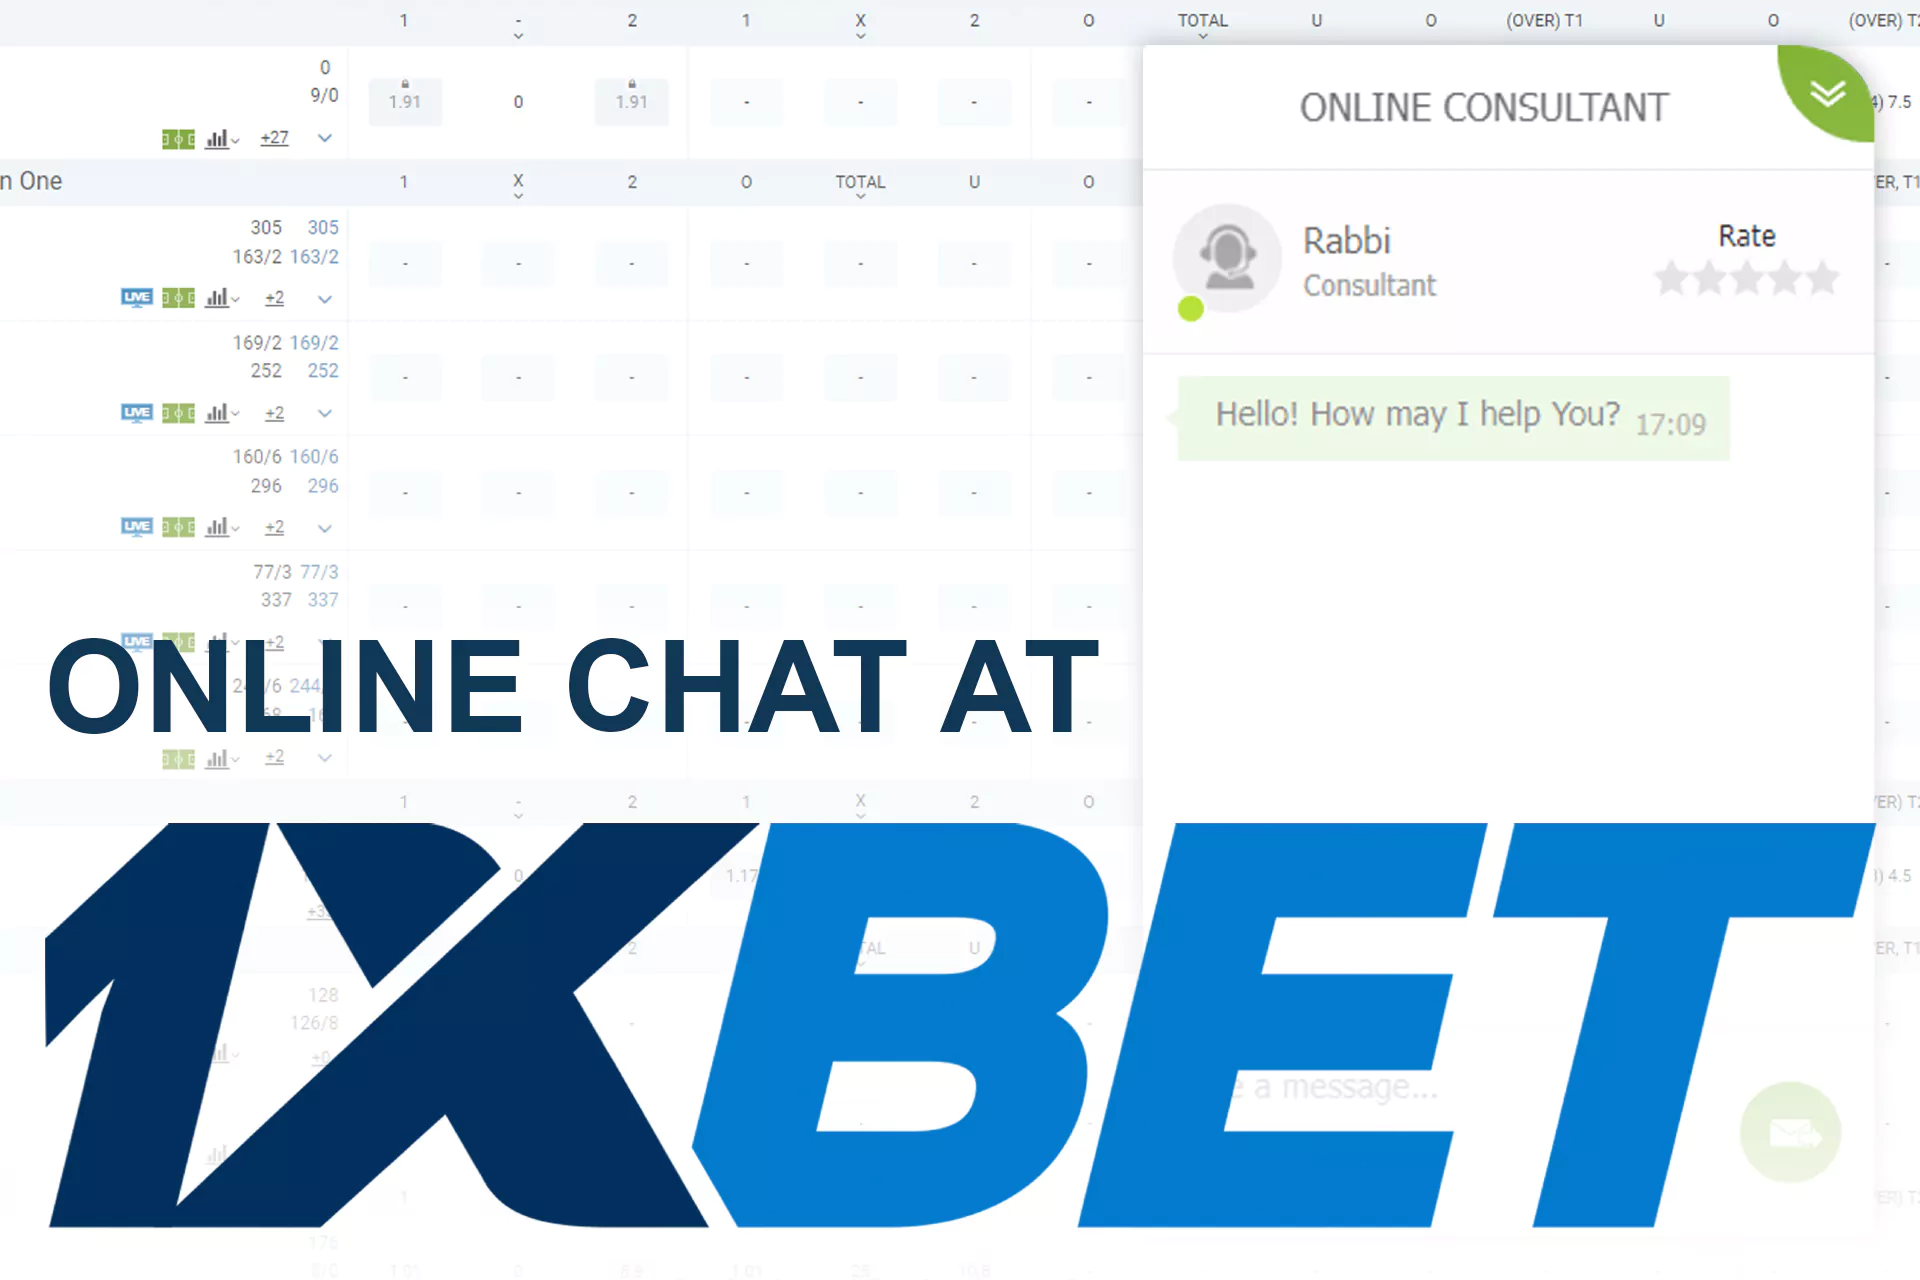 You can contact 1xBet Bangladesh through the live chat on the site.